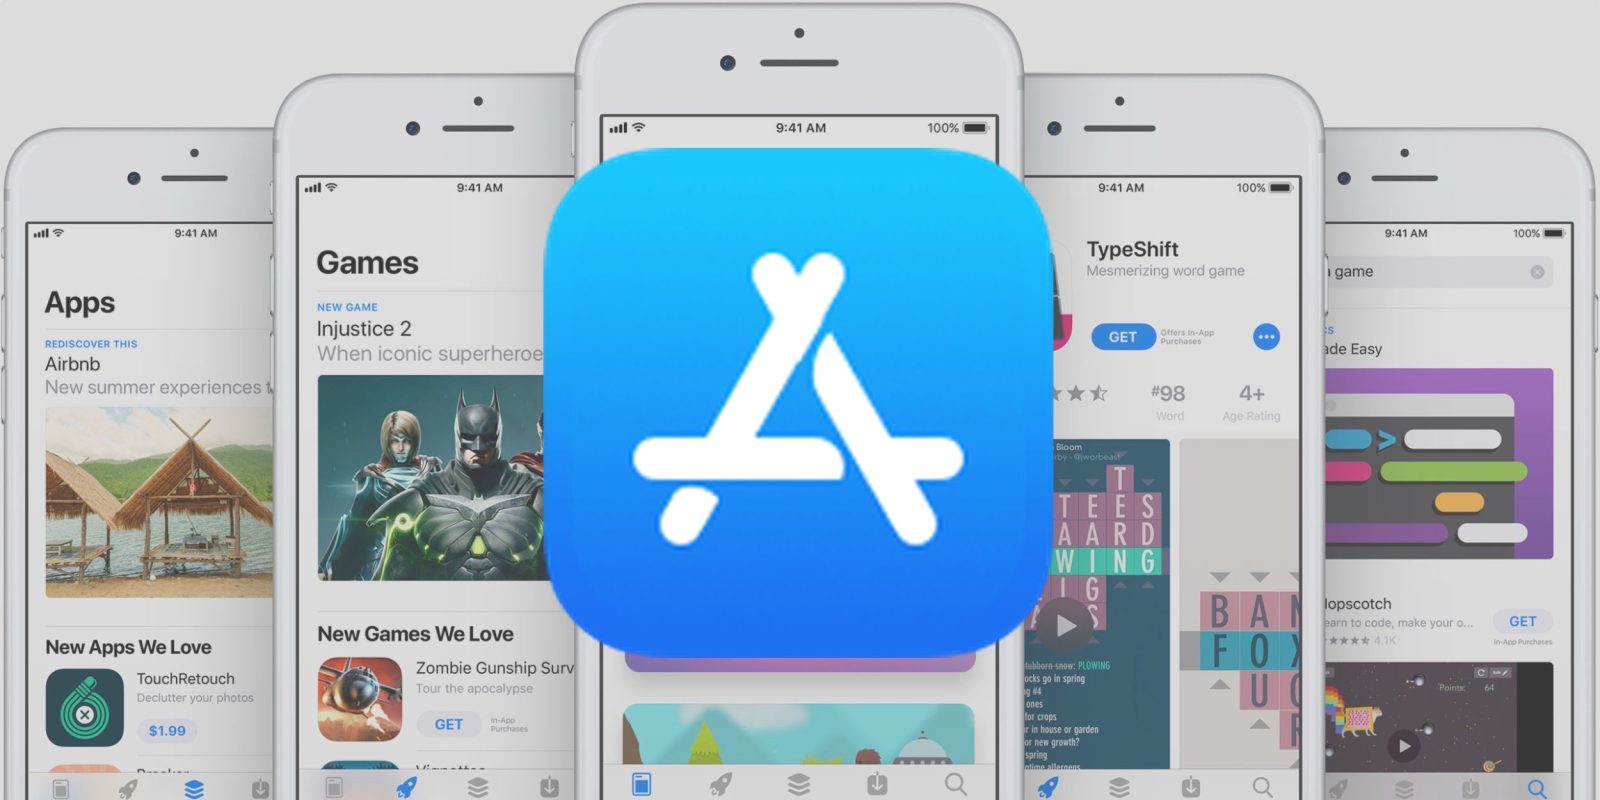 New App Store rules will require all apps to have a privacy policy